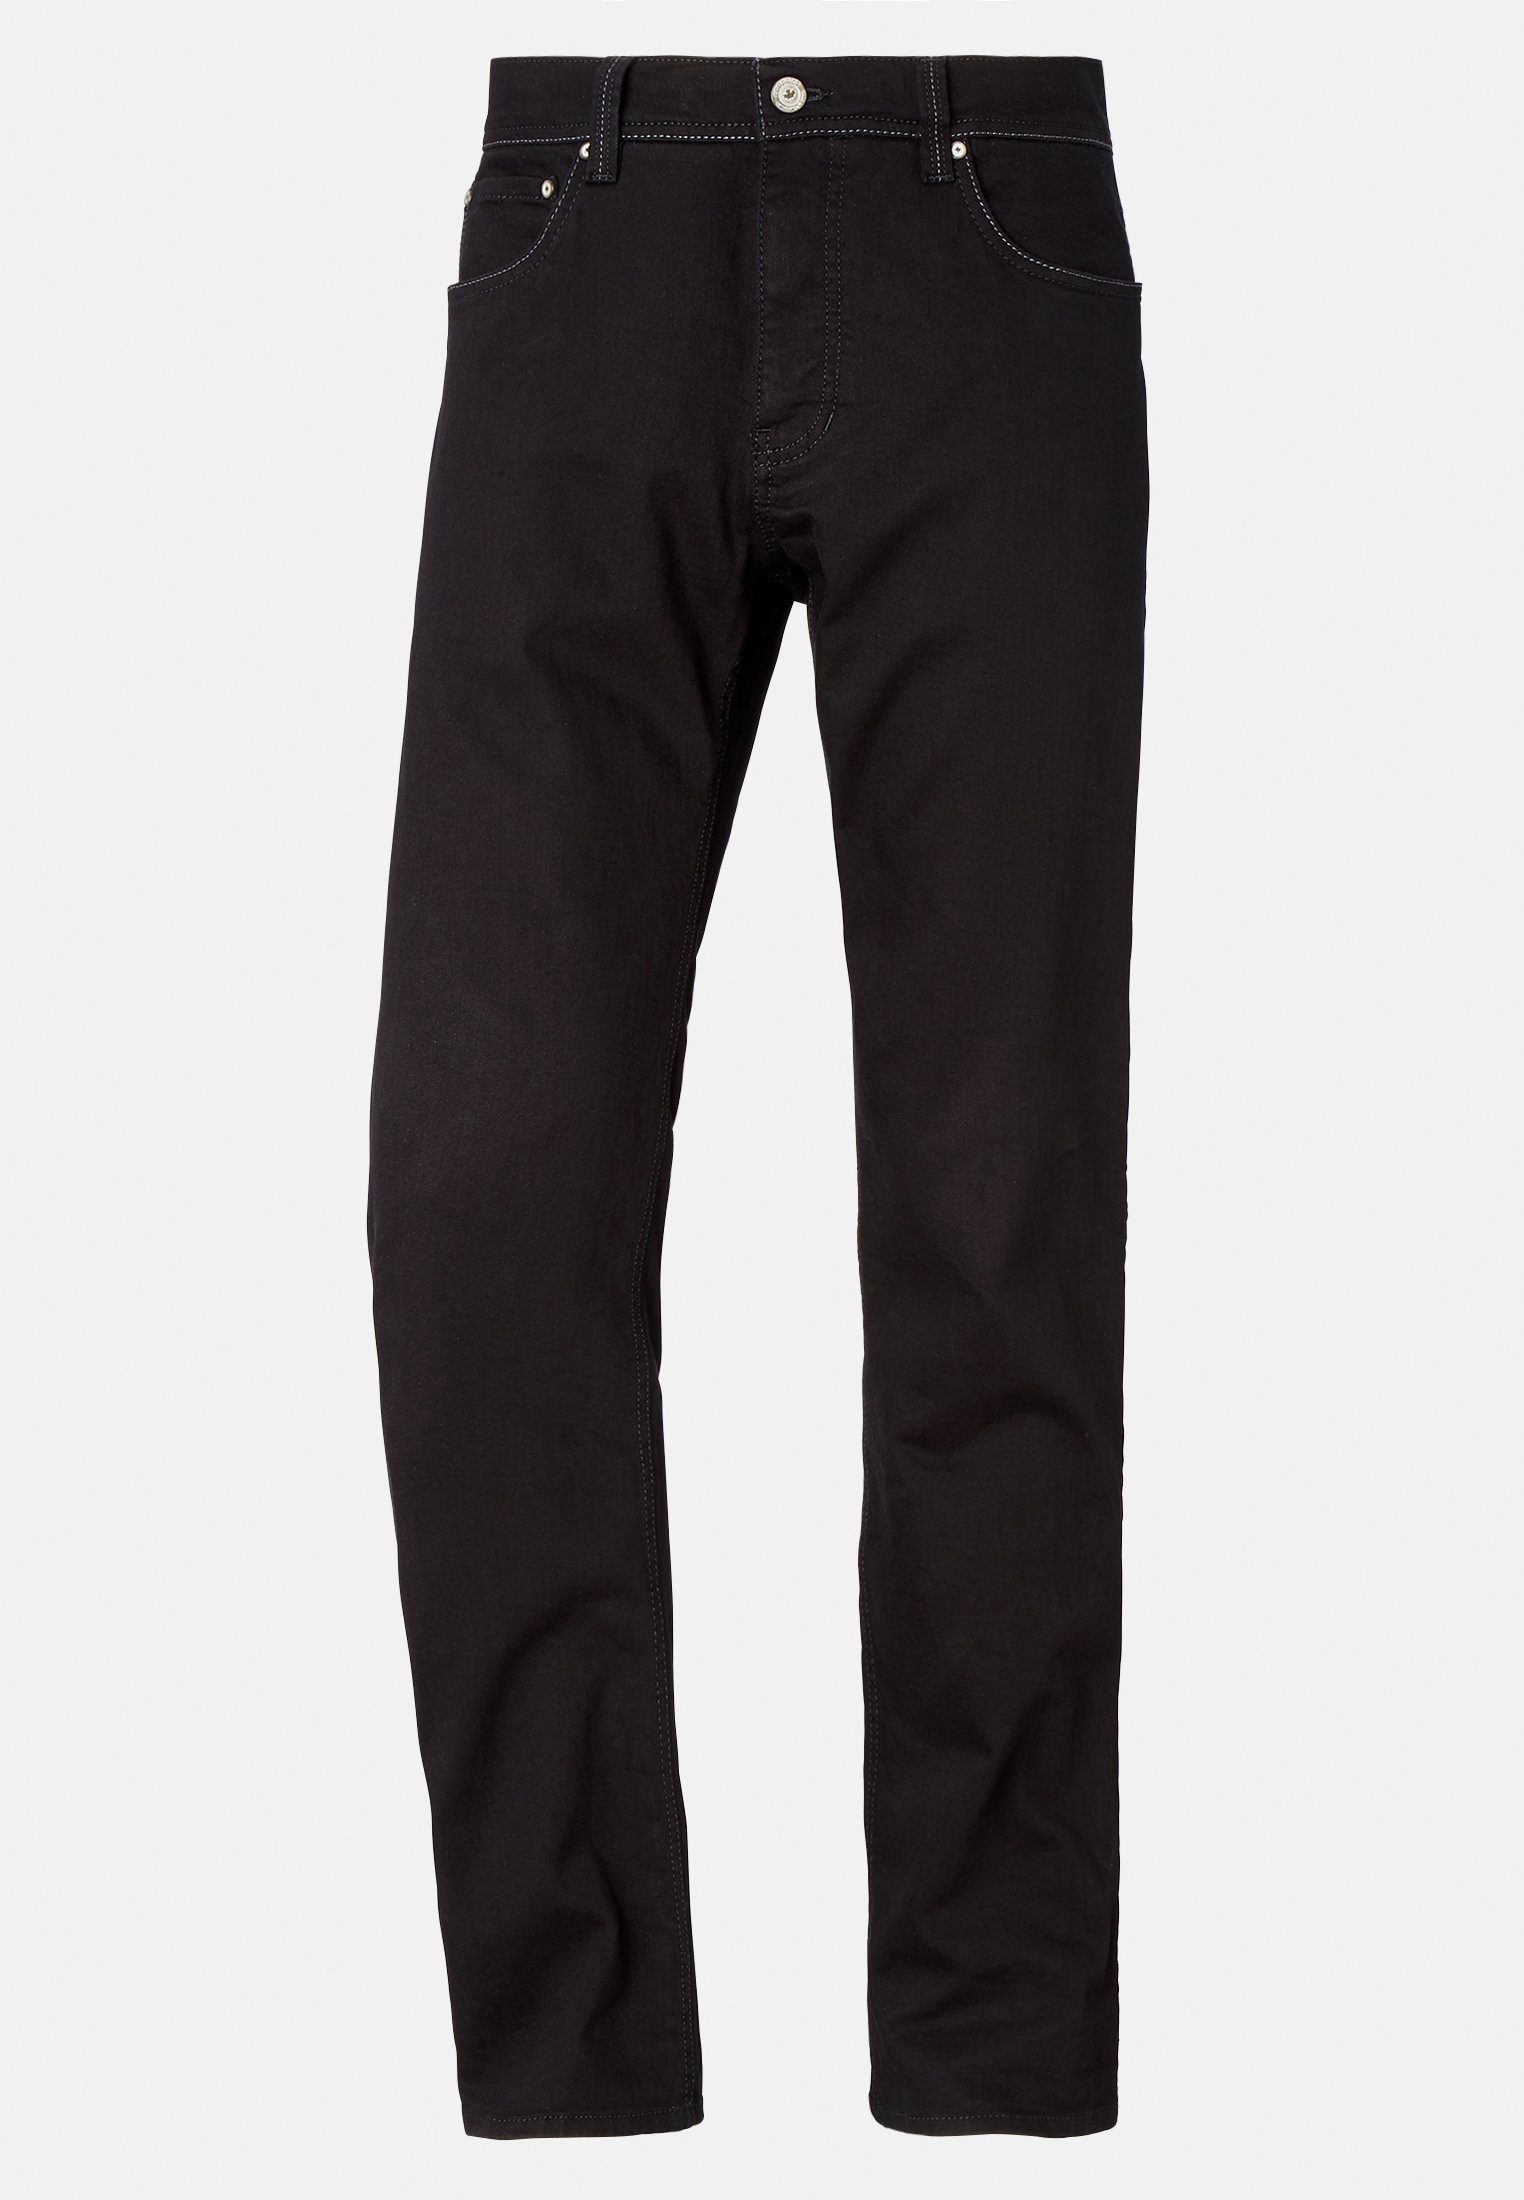 5-Pocket-Jeans Redpoint Langley